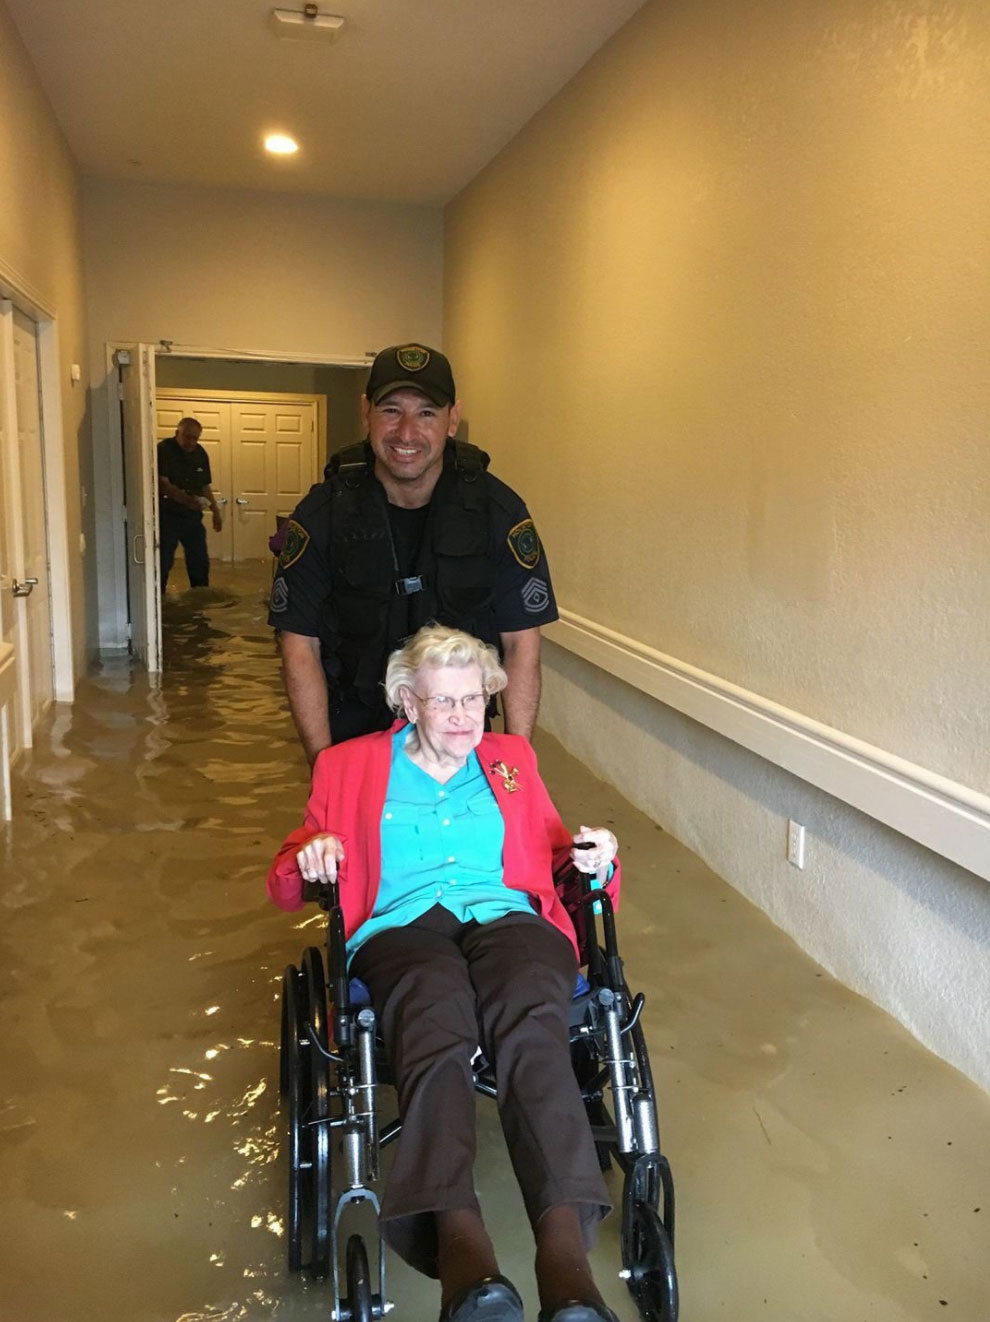 <div class='meta'><div class='origin-logo' data-origin='none'></div><span class='caption-text' data-credit='houstonpolice/Twitter'>The Houston Police rescues a woman stranded by the flood.</span></div>